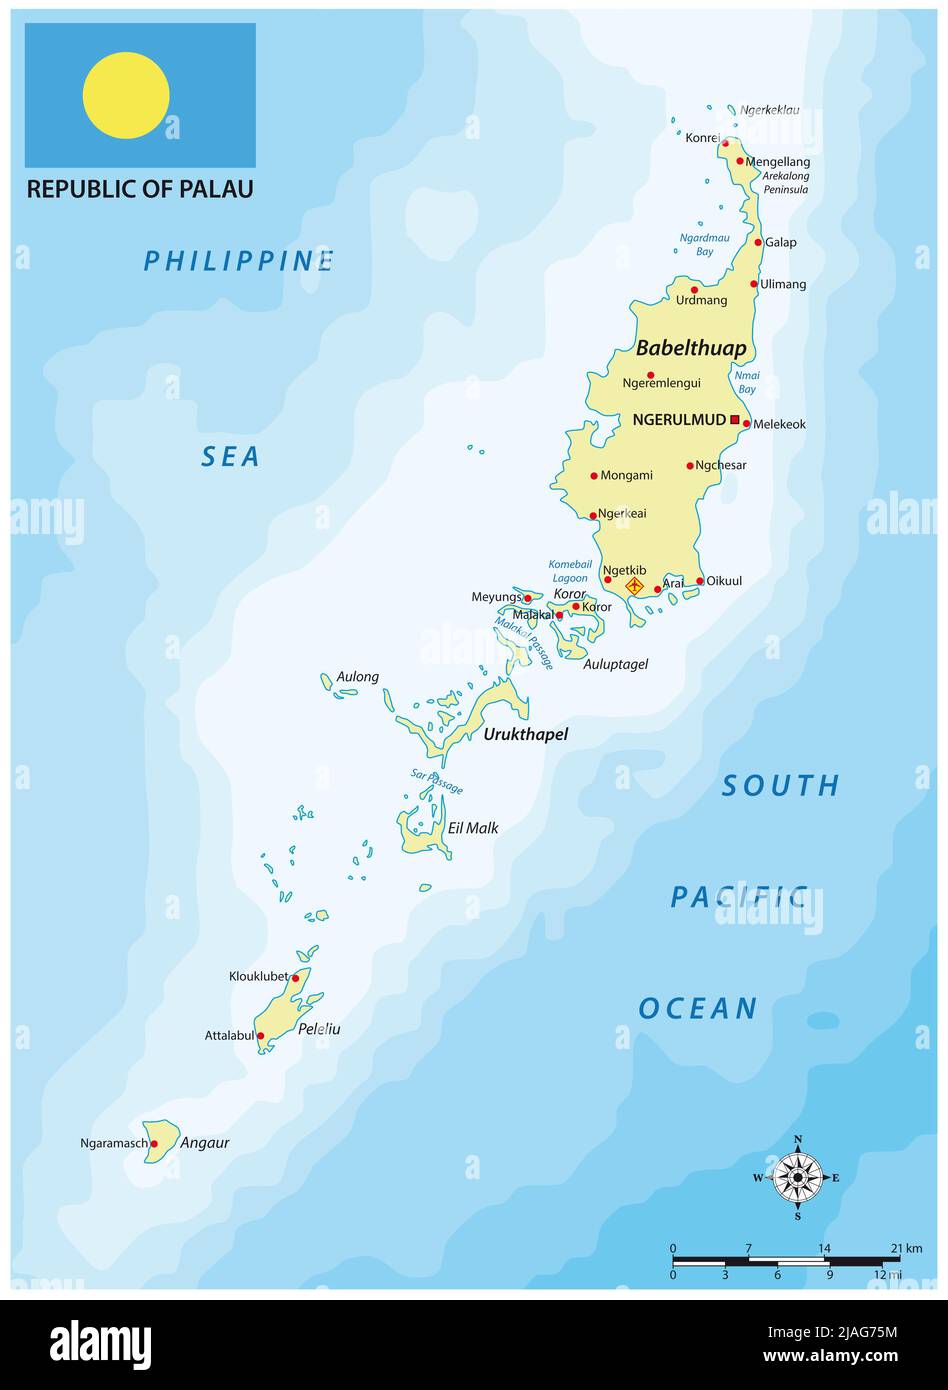 Vector map of the Pacific island nation of Palau Stock Photo